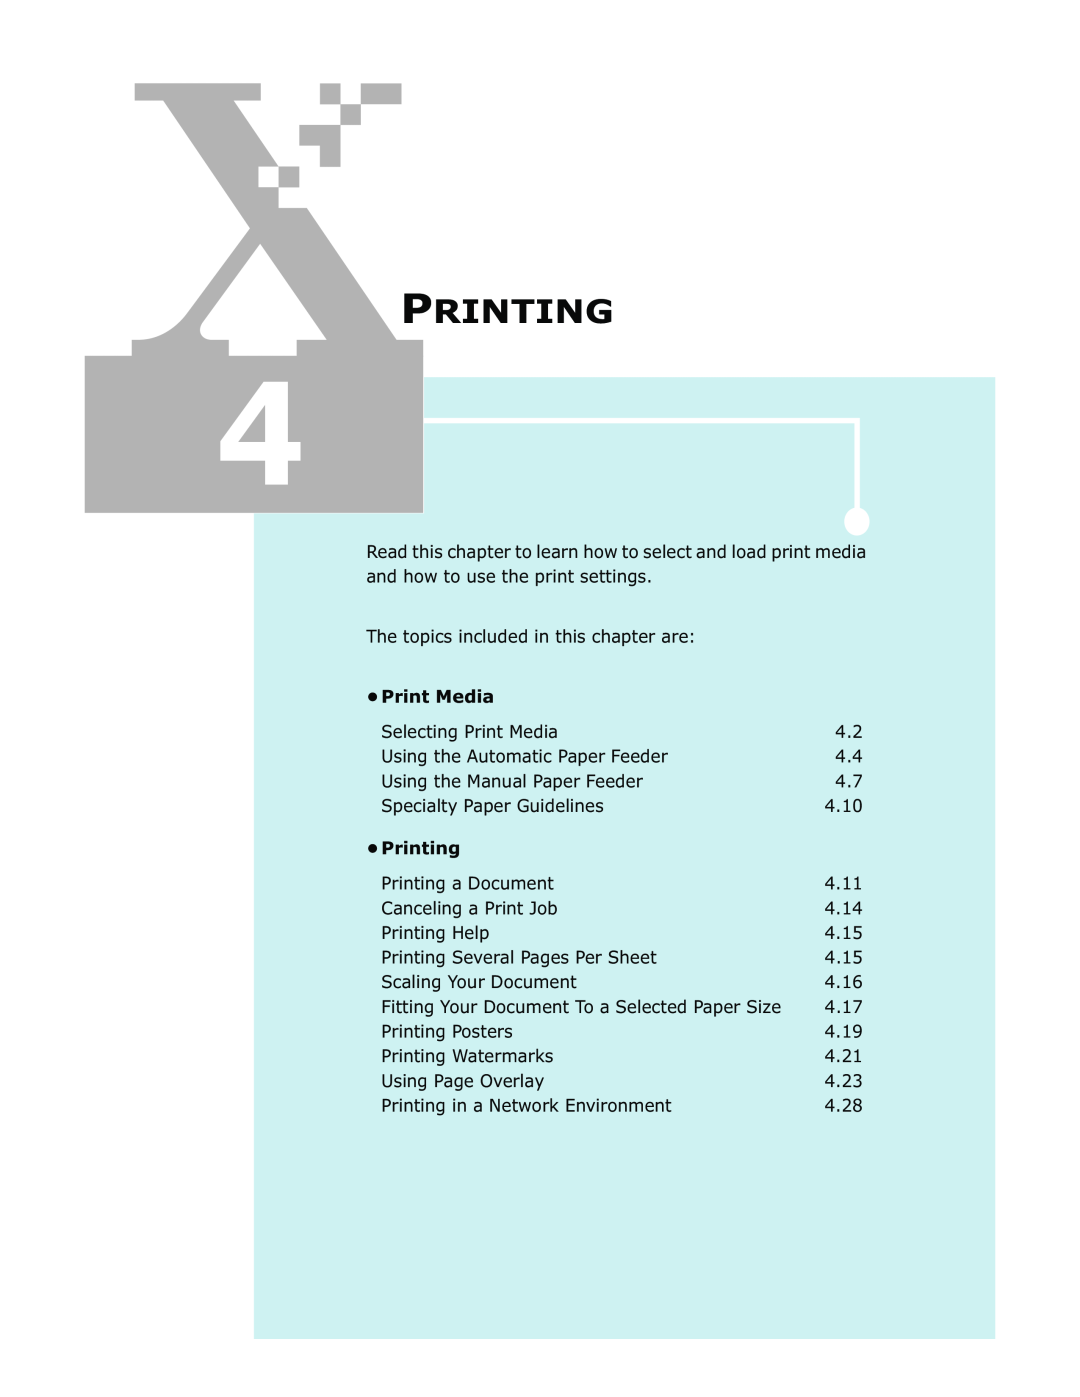 Xerox Pro 580 manual Printing, Print Media, Fitting Your Document To a Selected Paper Size 